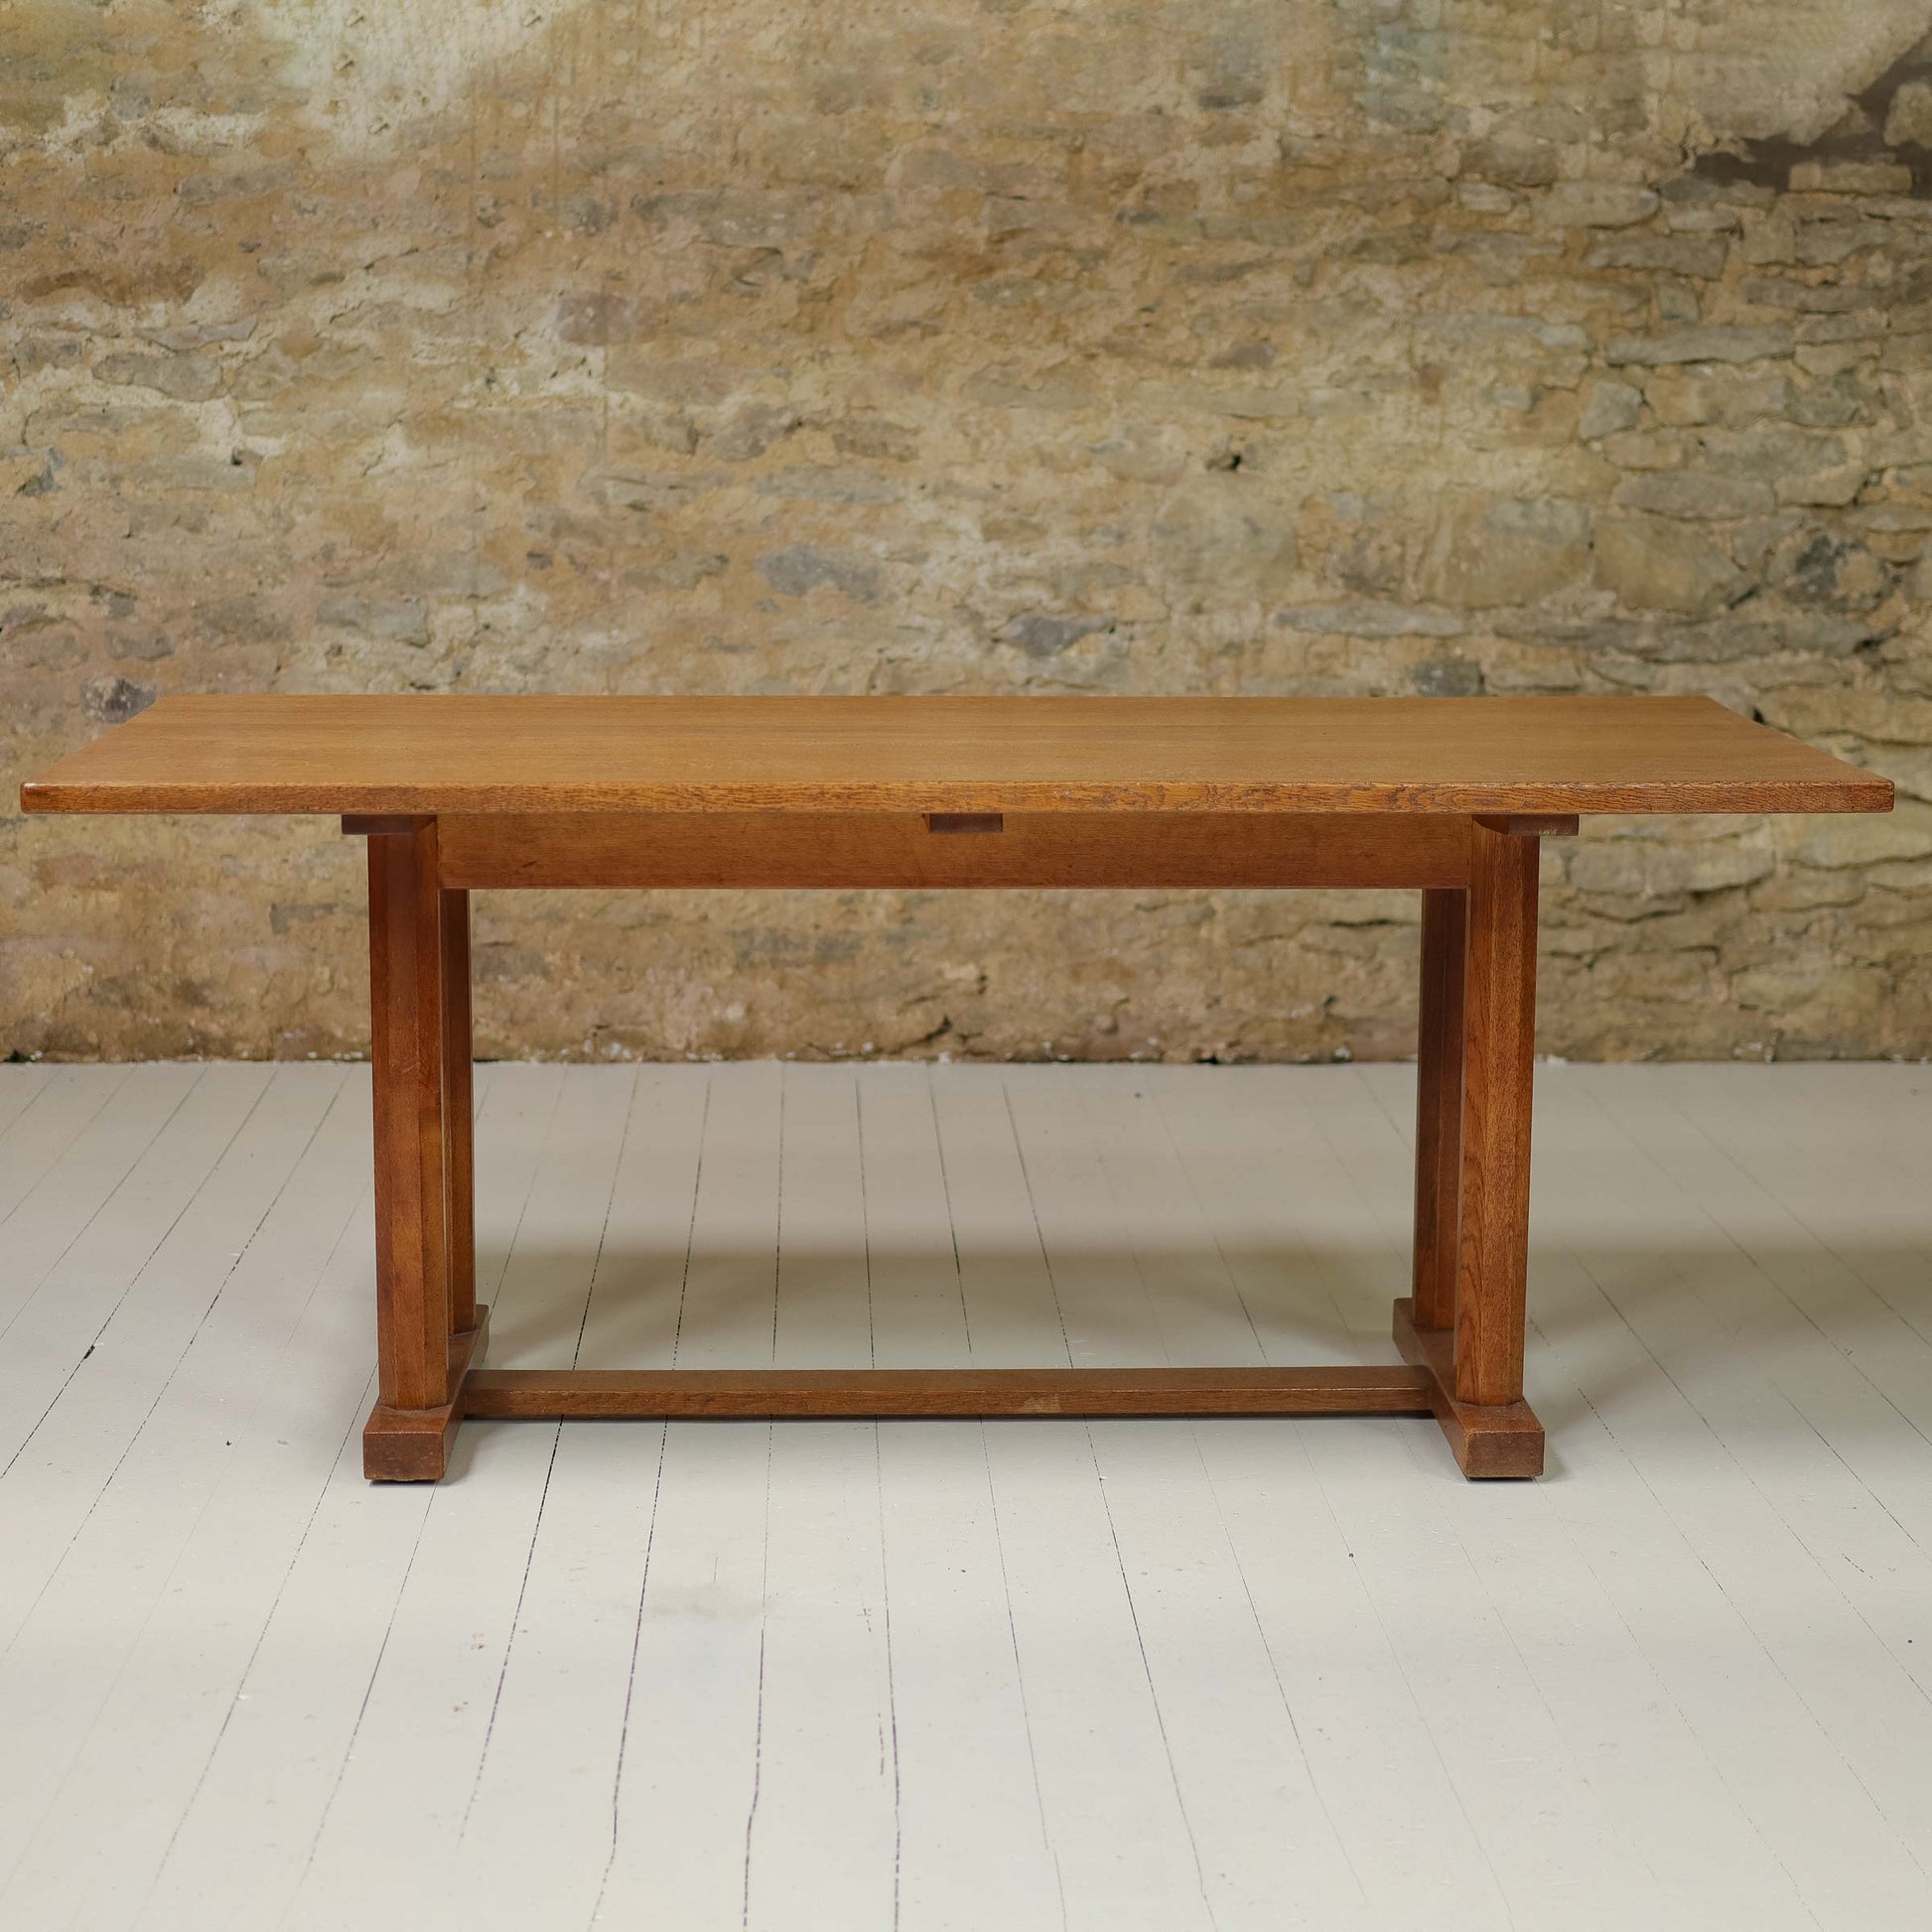 Gordon Russell Arts & Crafts Cotswold School English Oak Dining Table c. 1935